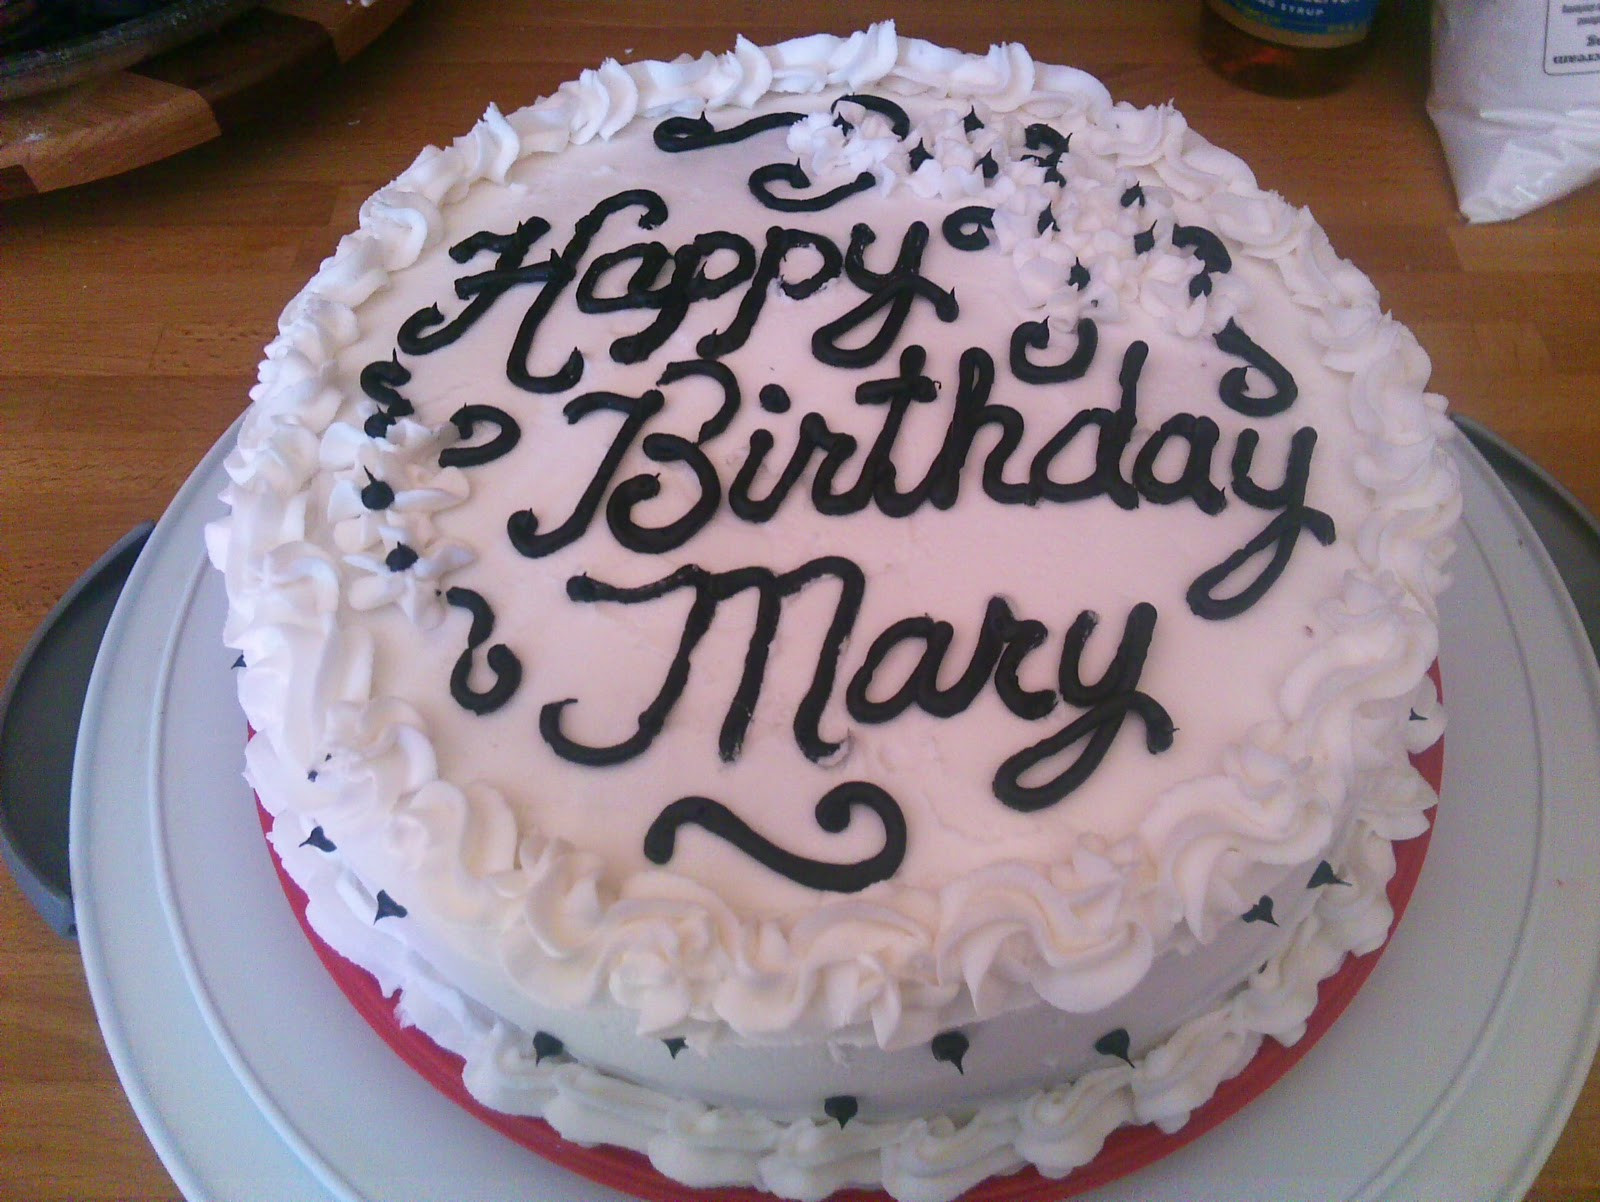 Happy Birthday Mary Cake
 Have you wished Mary Yonkers a Happy Birthday